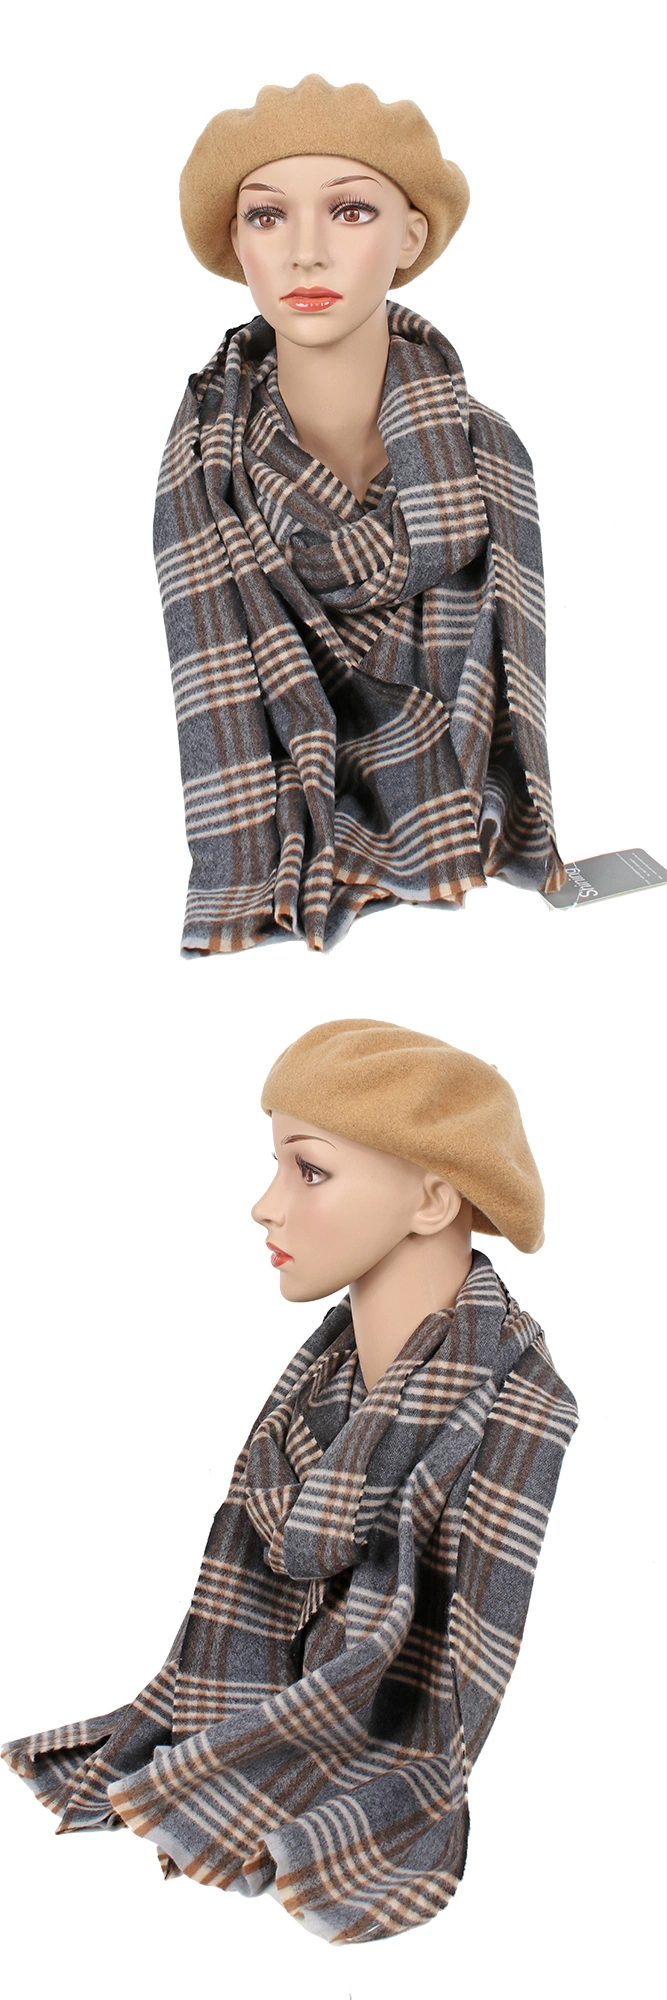 New Arrive Men Fashion Woven Checks Scarves Man Soft Smoothly Winter Wrap Shawl Scarf for Women